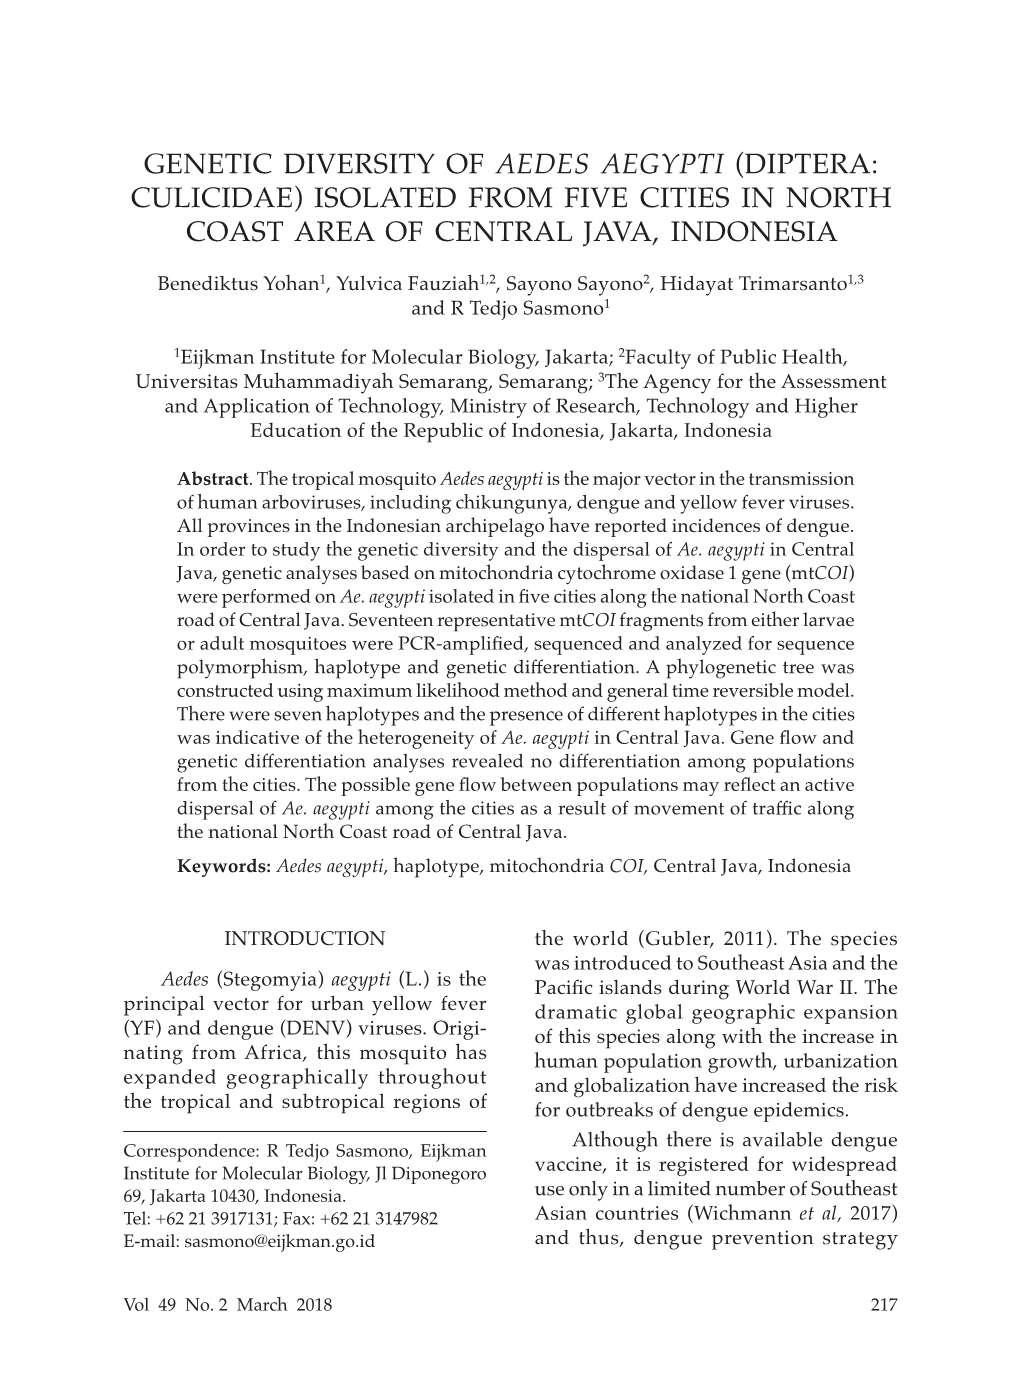 Genetic Diversity of Aedes Aegypti (Diptera: Culicidae) Isolated from Five Cities in North Coast Area of Central Java, Indonesia